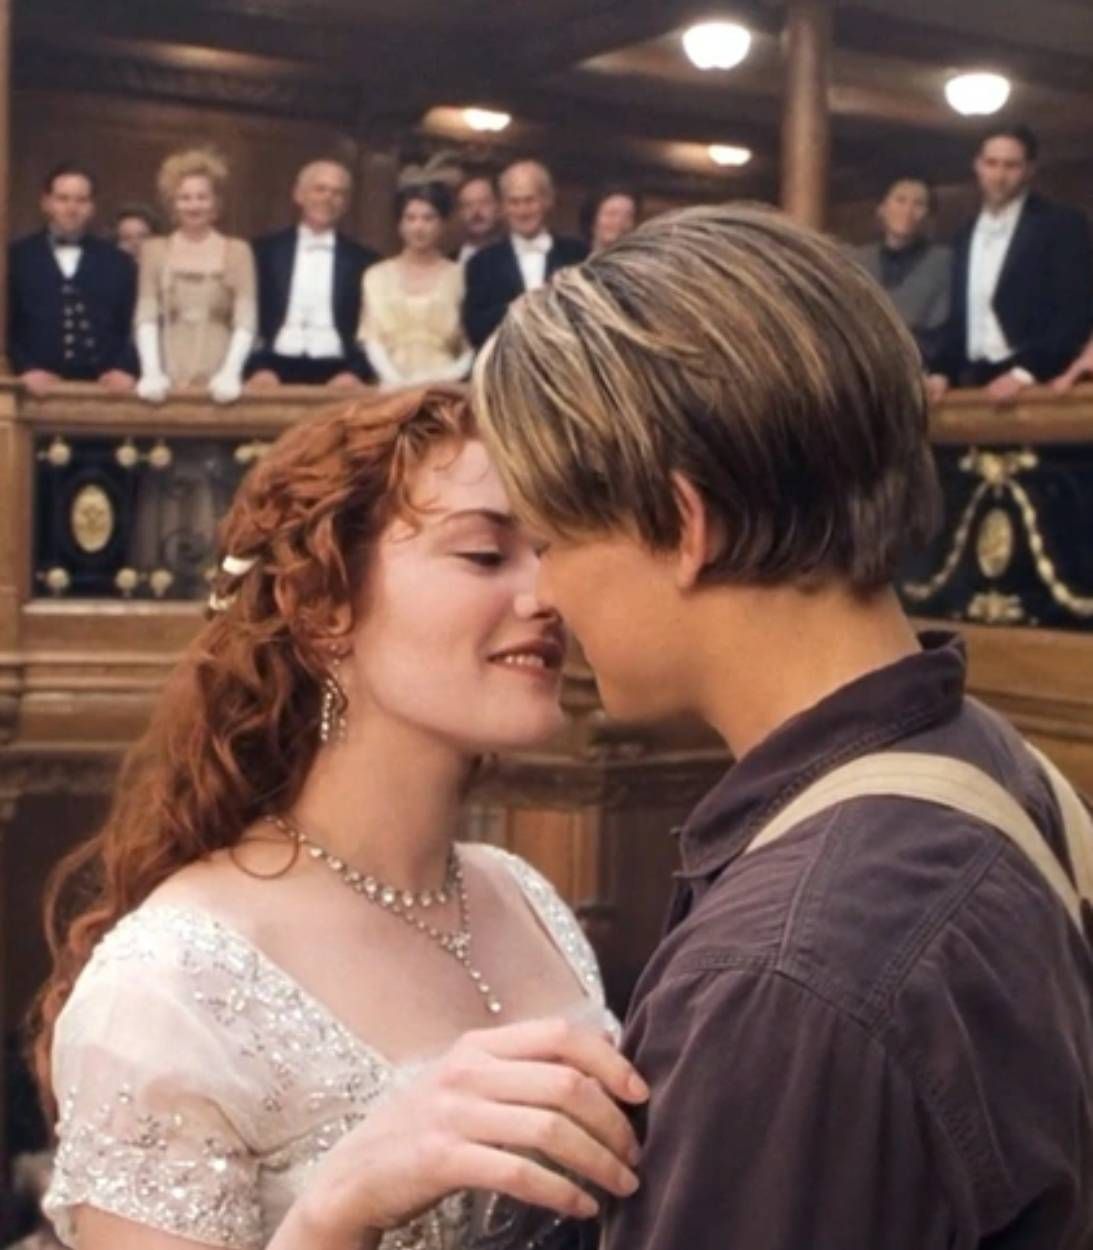 Titanic Jack and Rose pic vertical